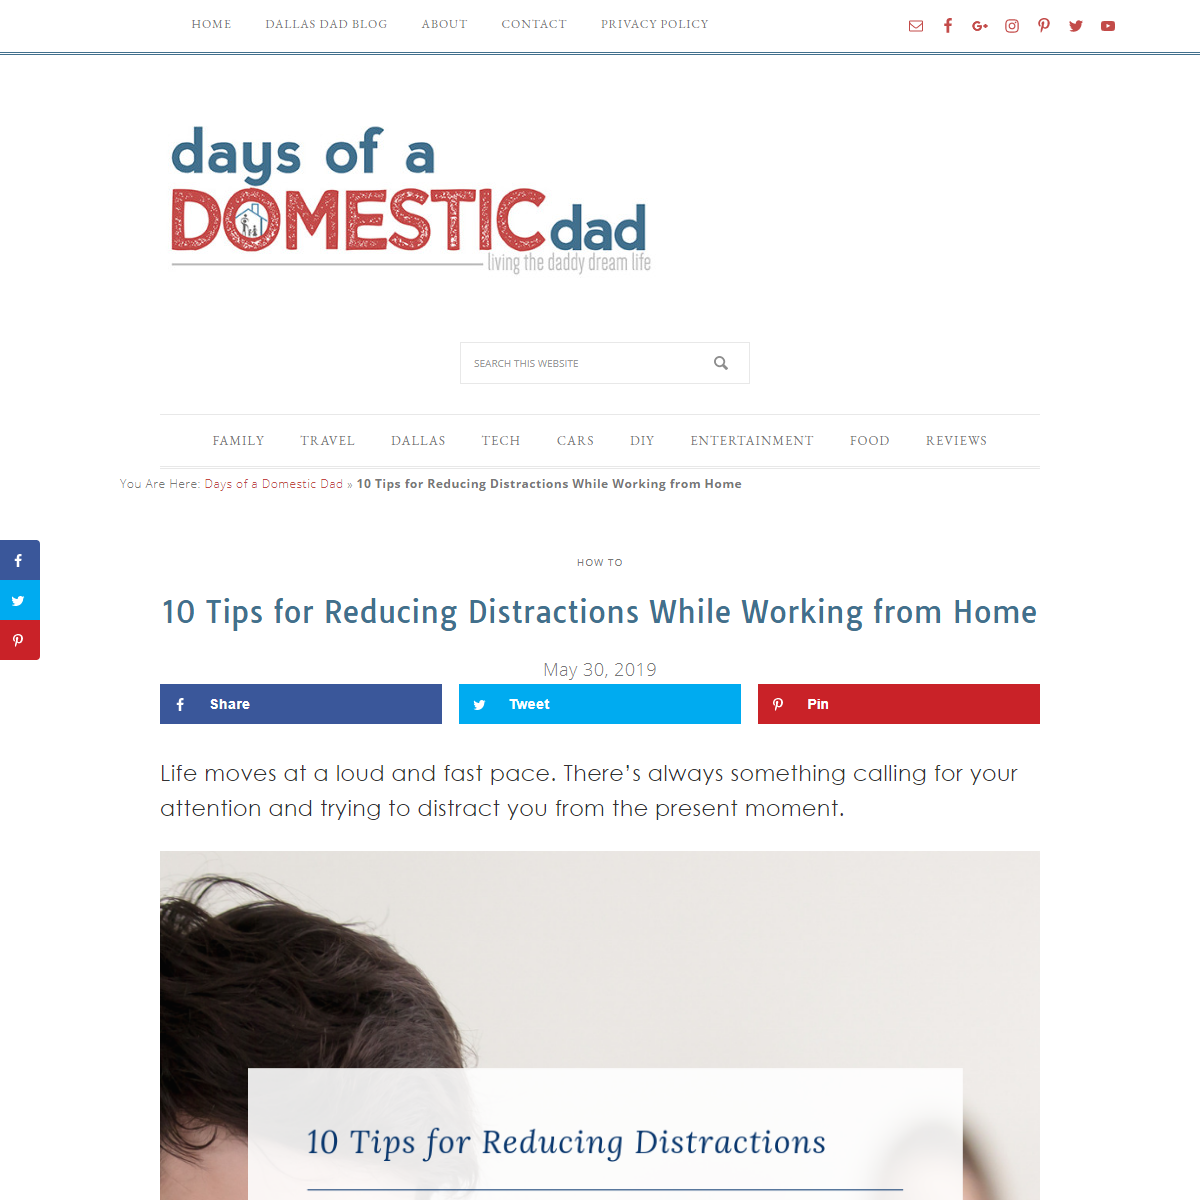 A complete backup of https://daysofadomesticdad.com/tips-for-reducing-distractions-while-working-from-home/